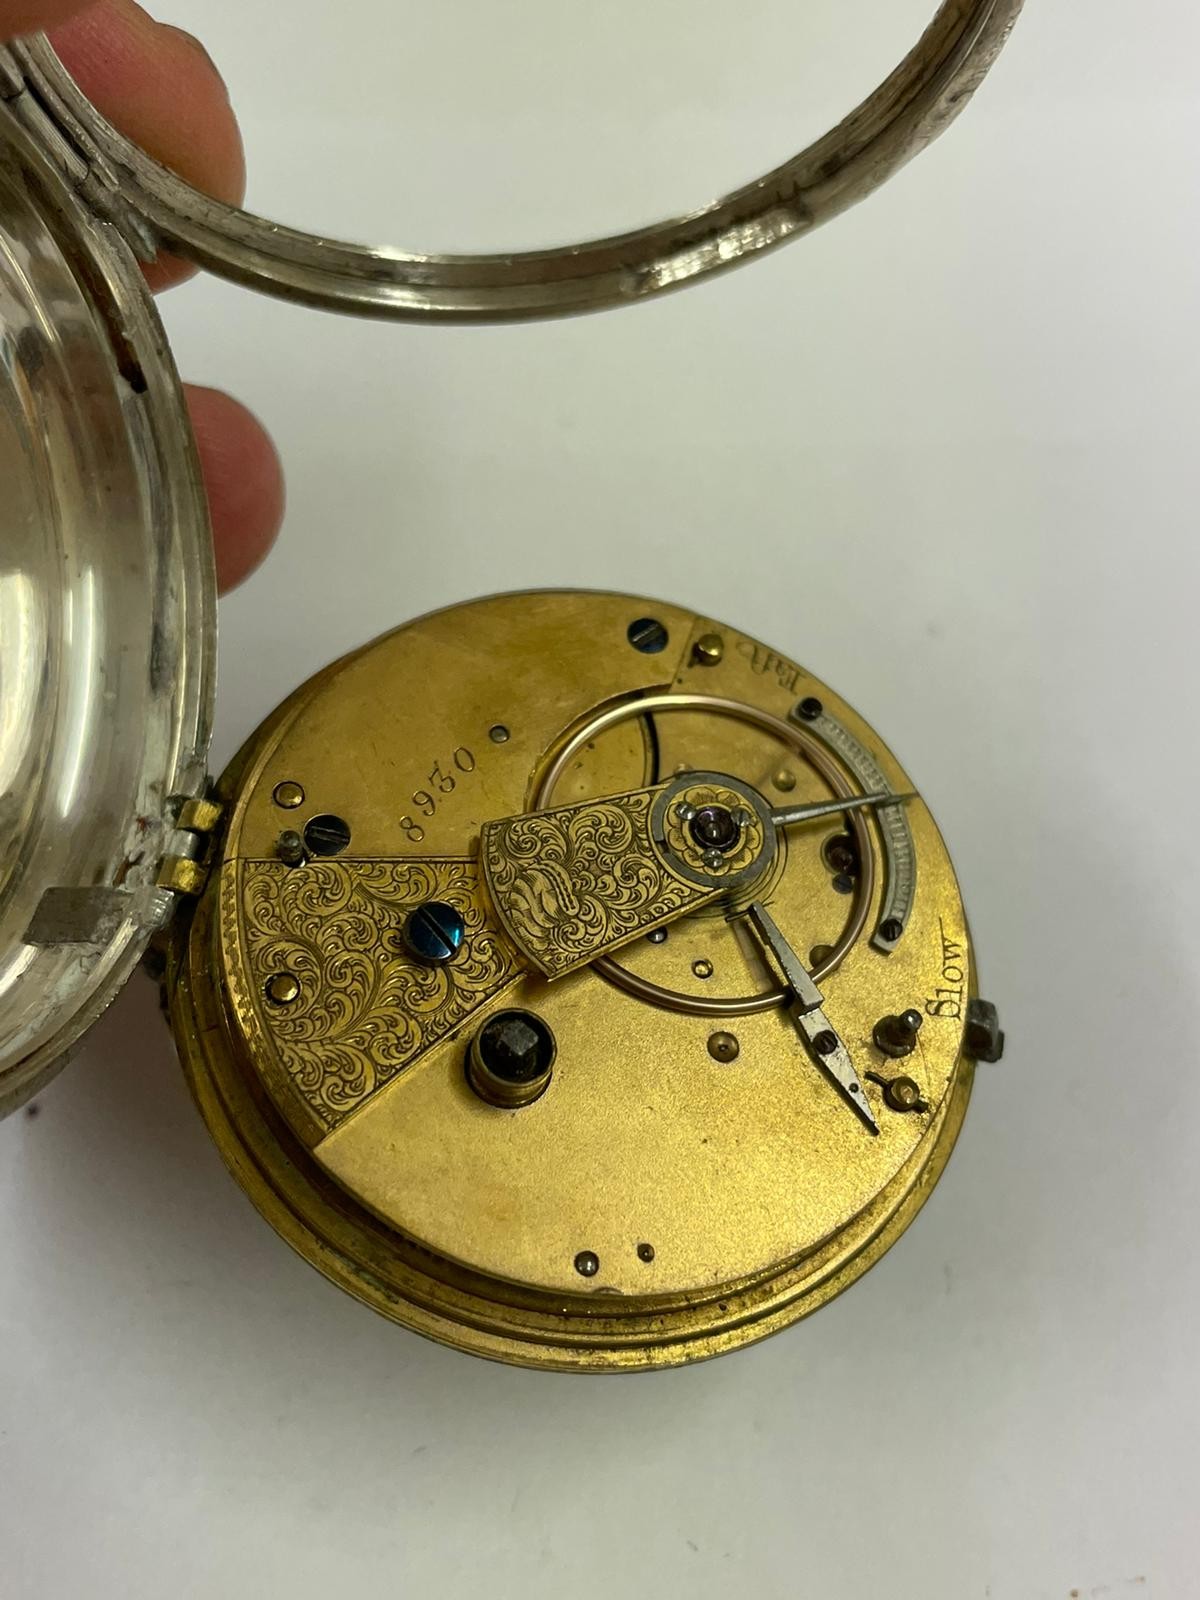 Antique silver fusee pocket watch working but missing glass , sold with no guarantees. - Image 6 of 7